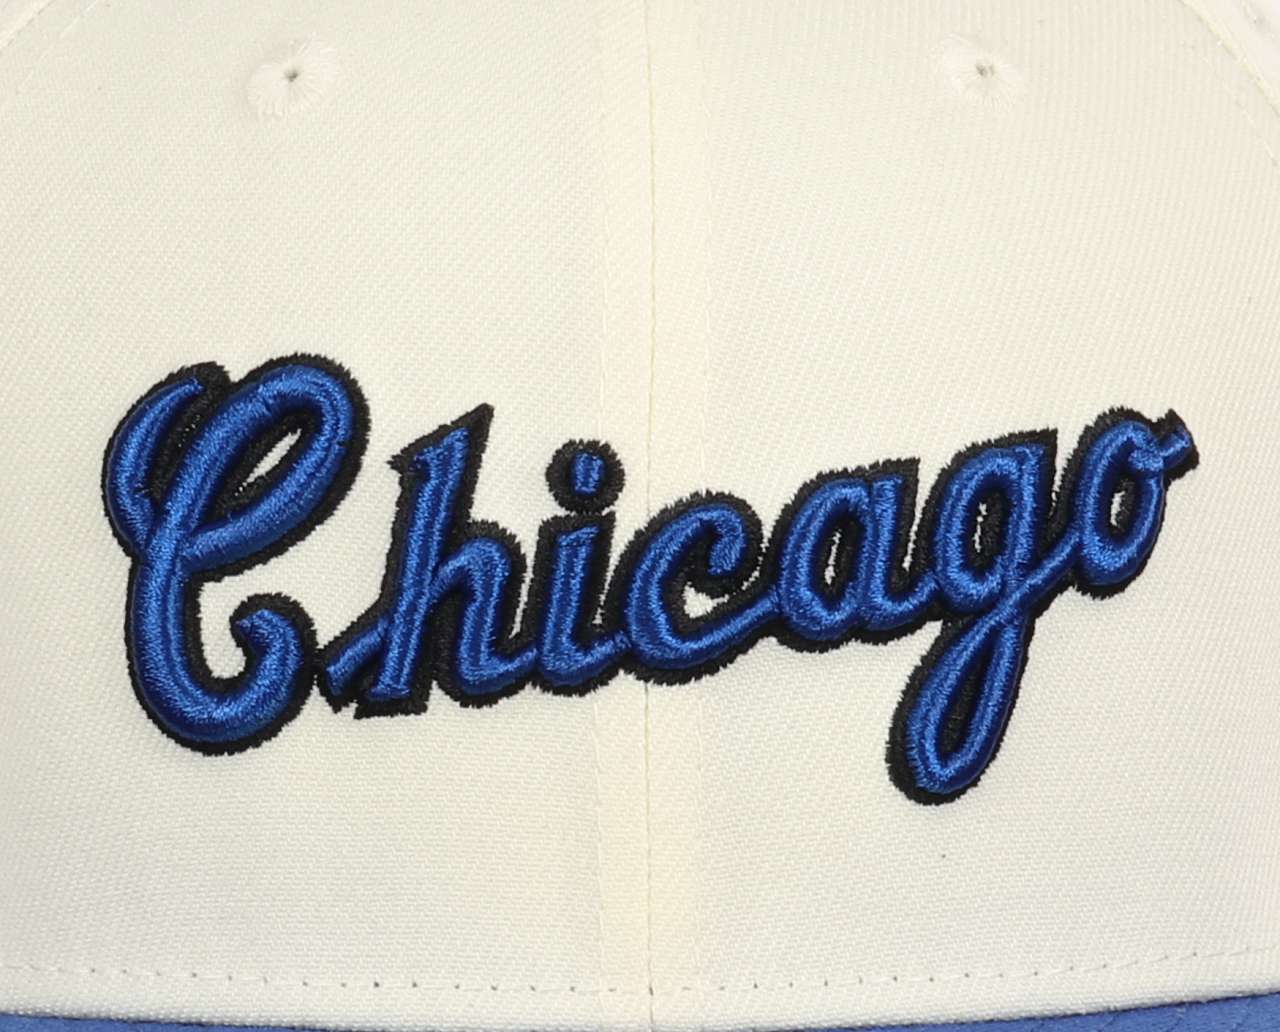 Chicago White Sox MLB Two Tone Cooperstown All-Star Game 1988 Sidepatch Chrome 59Fifty Basecap New Era